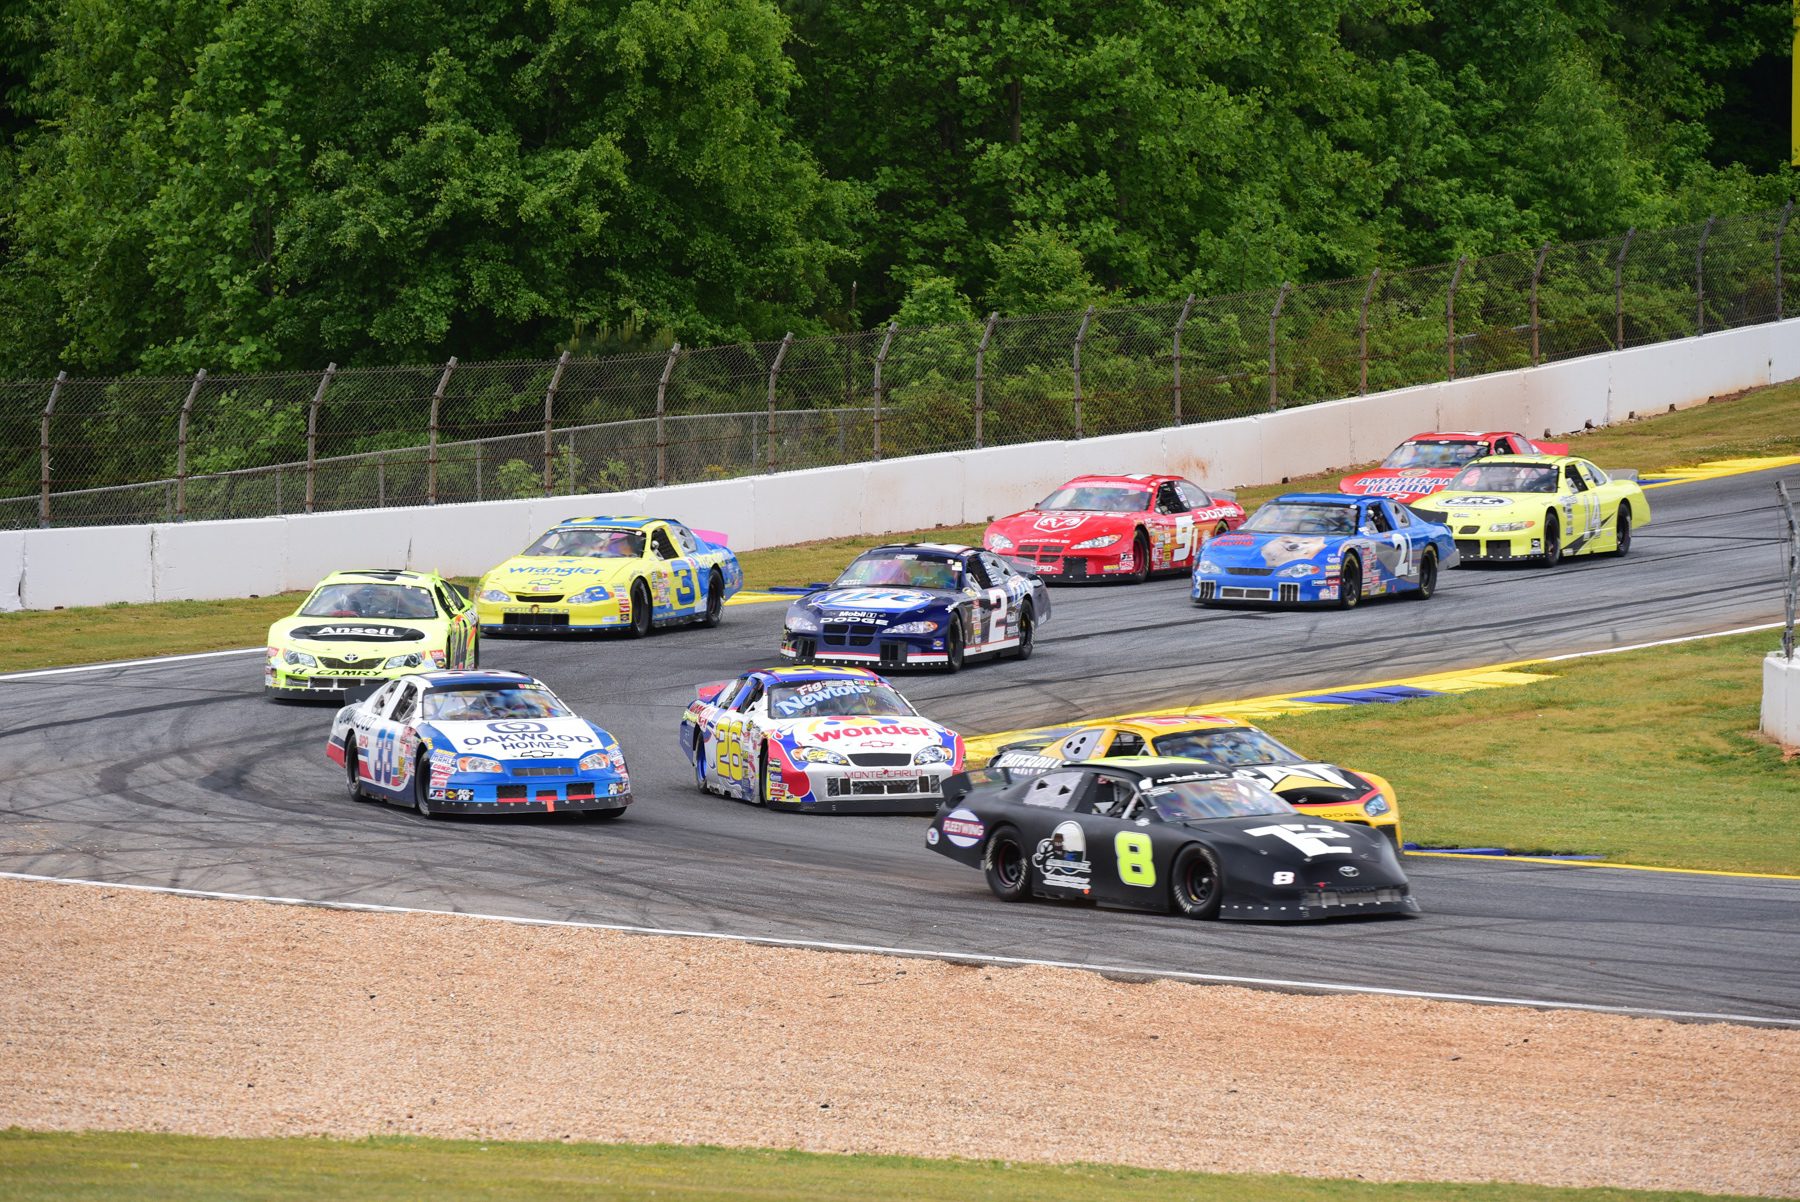 Formation lap for Group 8 WeatherTech Sprint Race.